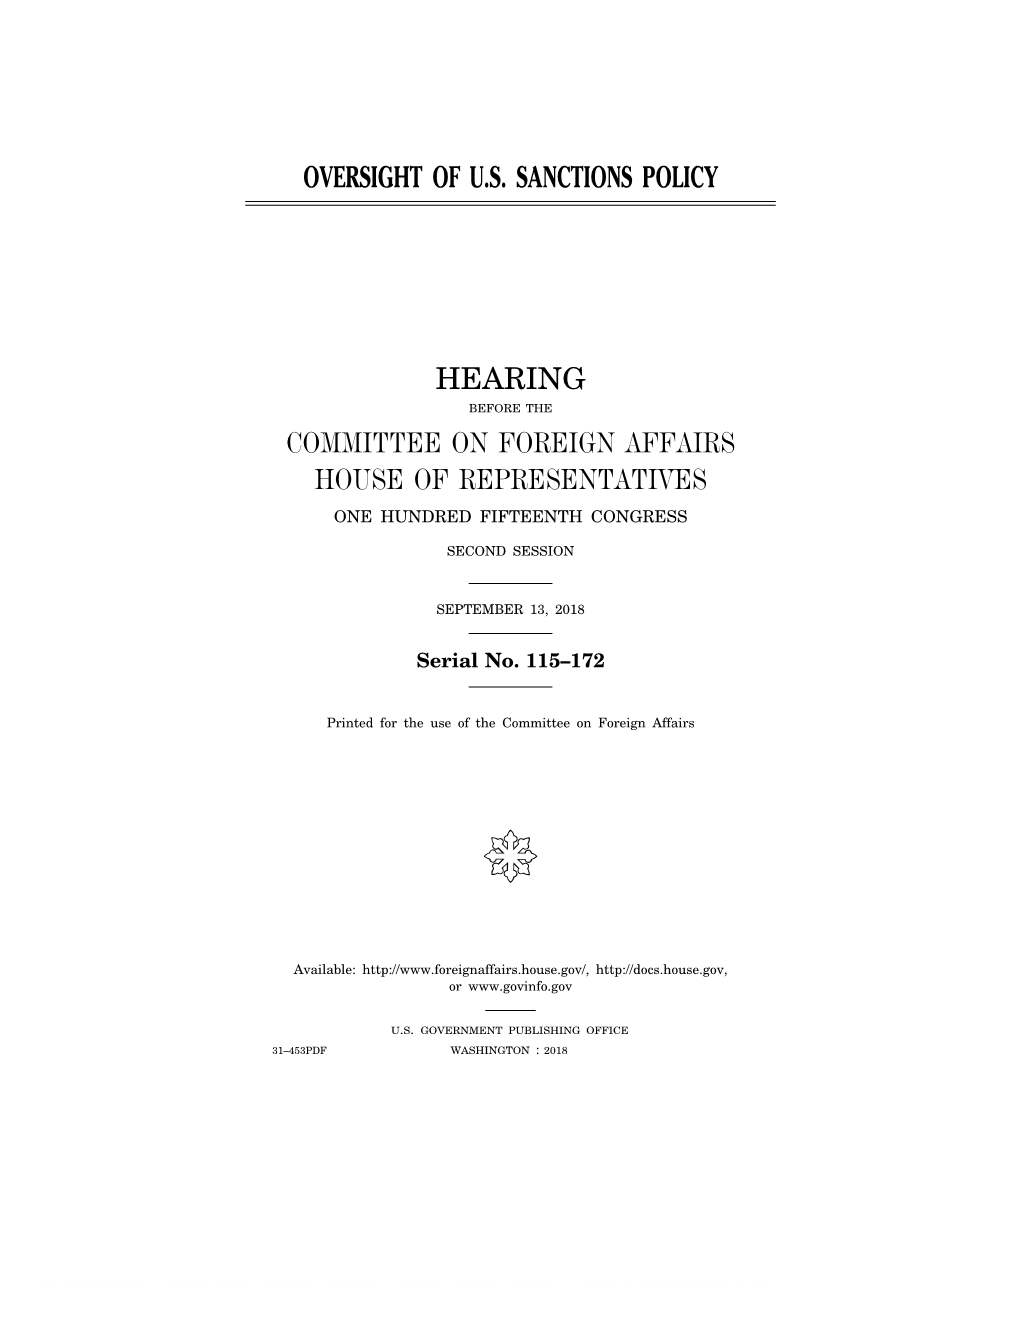 Oversight of U.S. Sanctions Policy Hearing